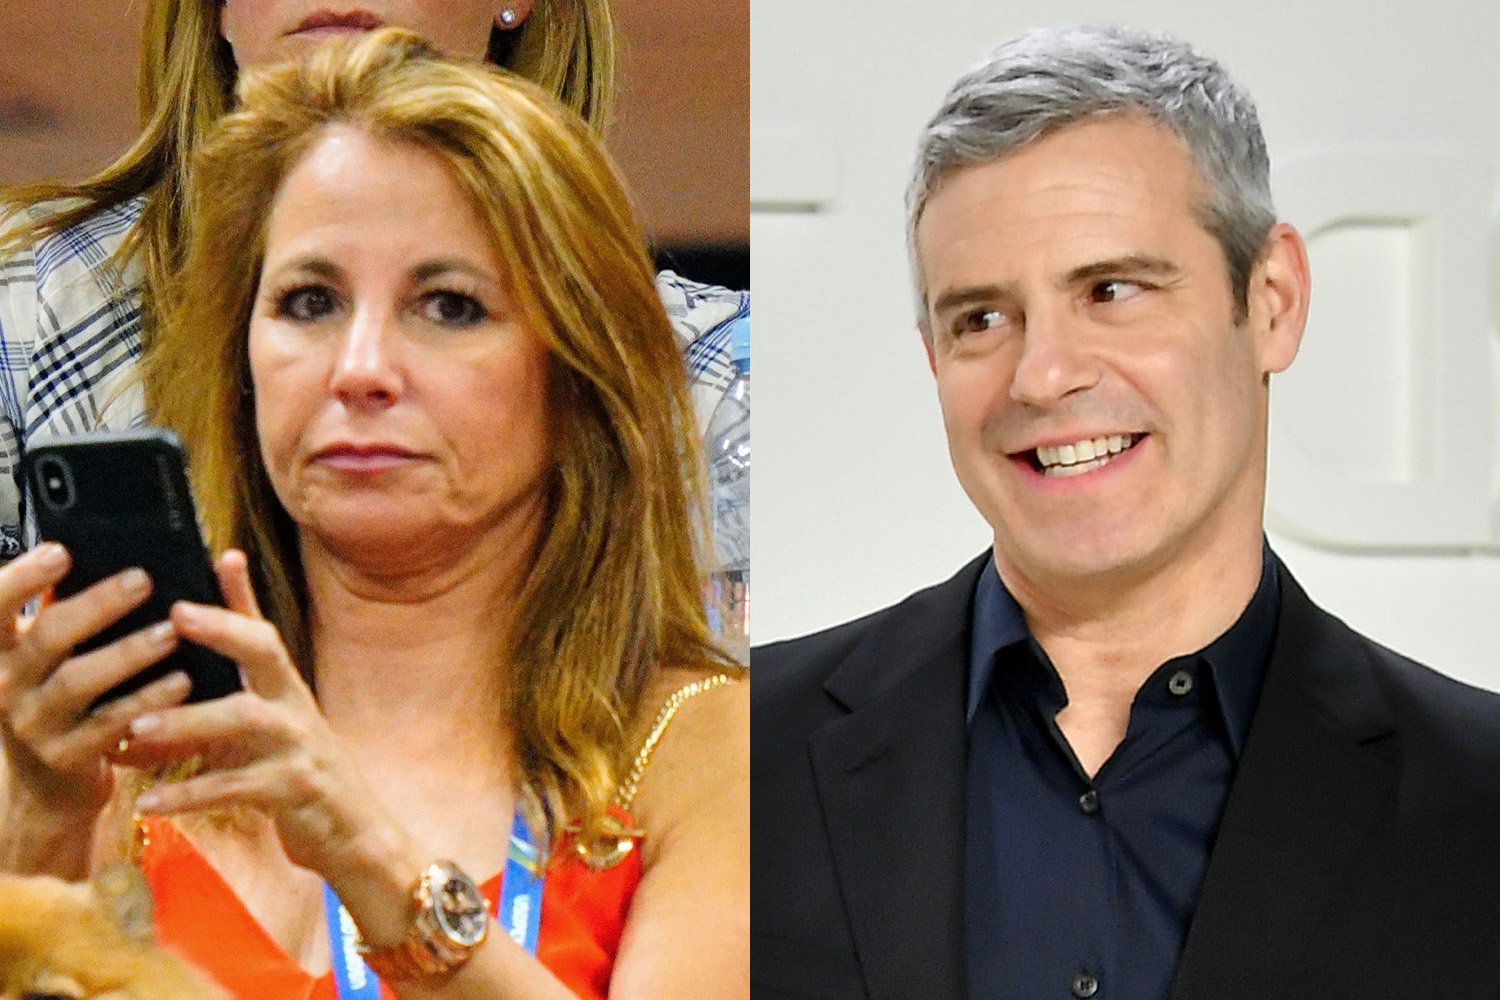 Jill Zarin complained to Andy Cohen